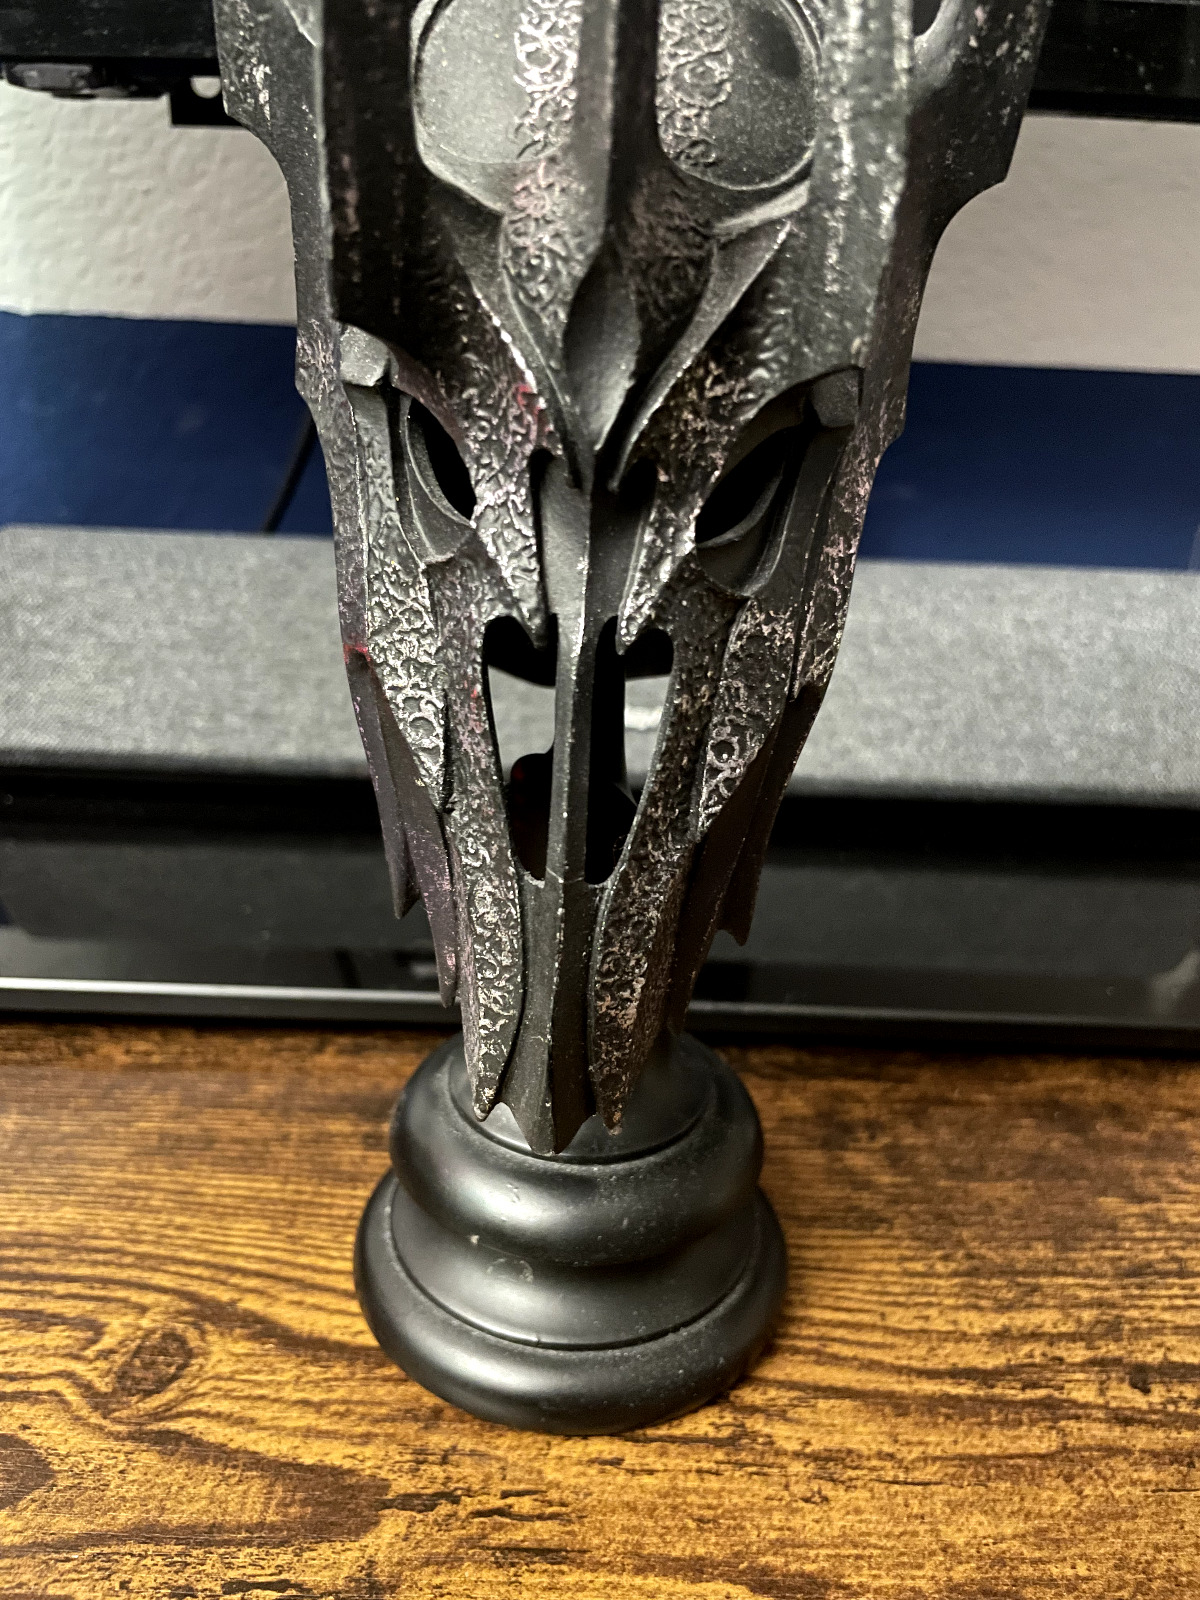 Sideshow Weta Helm Of Sauron (The Lord Of The Rings) #967/5000